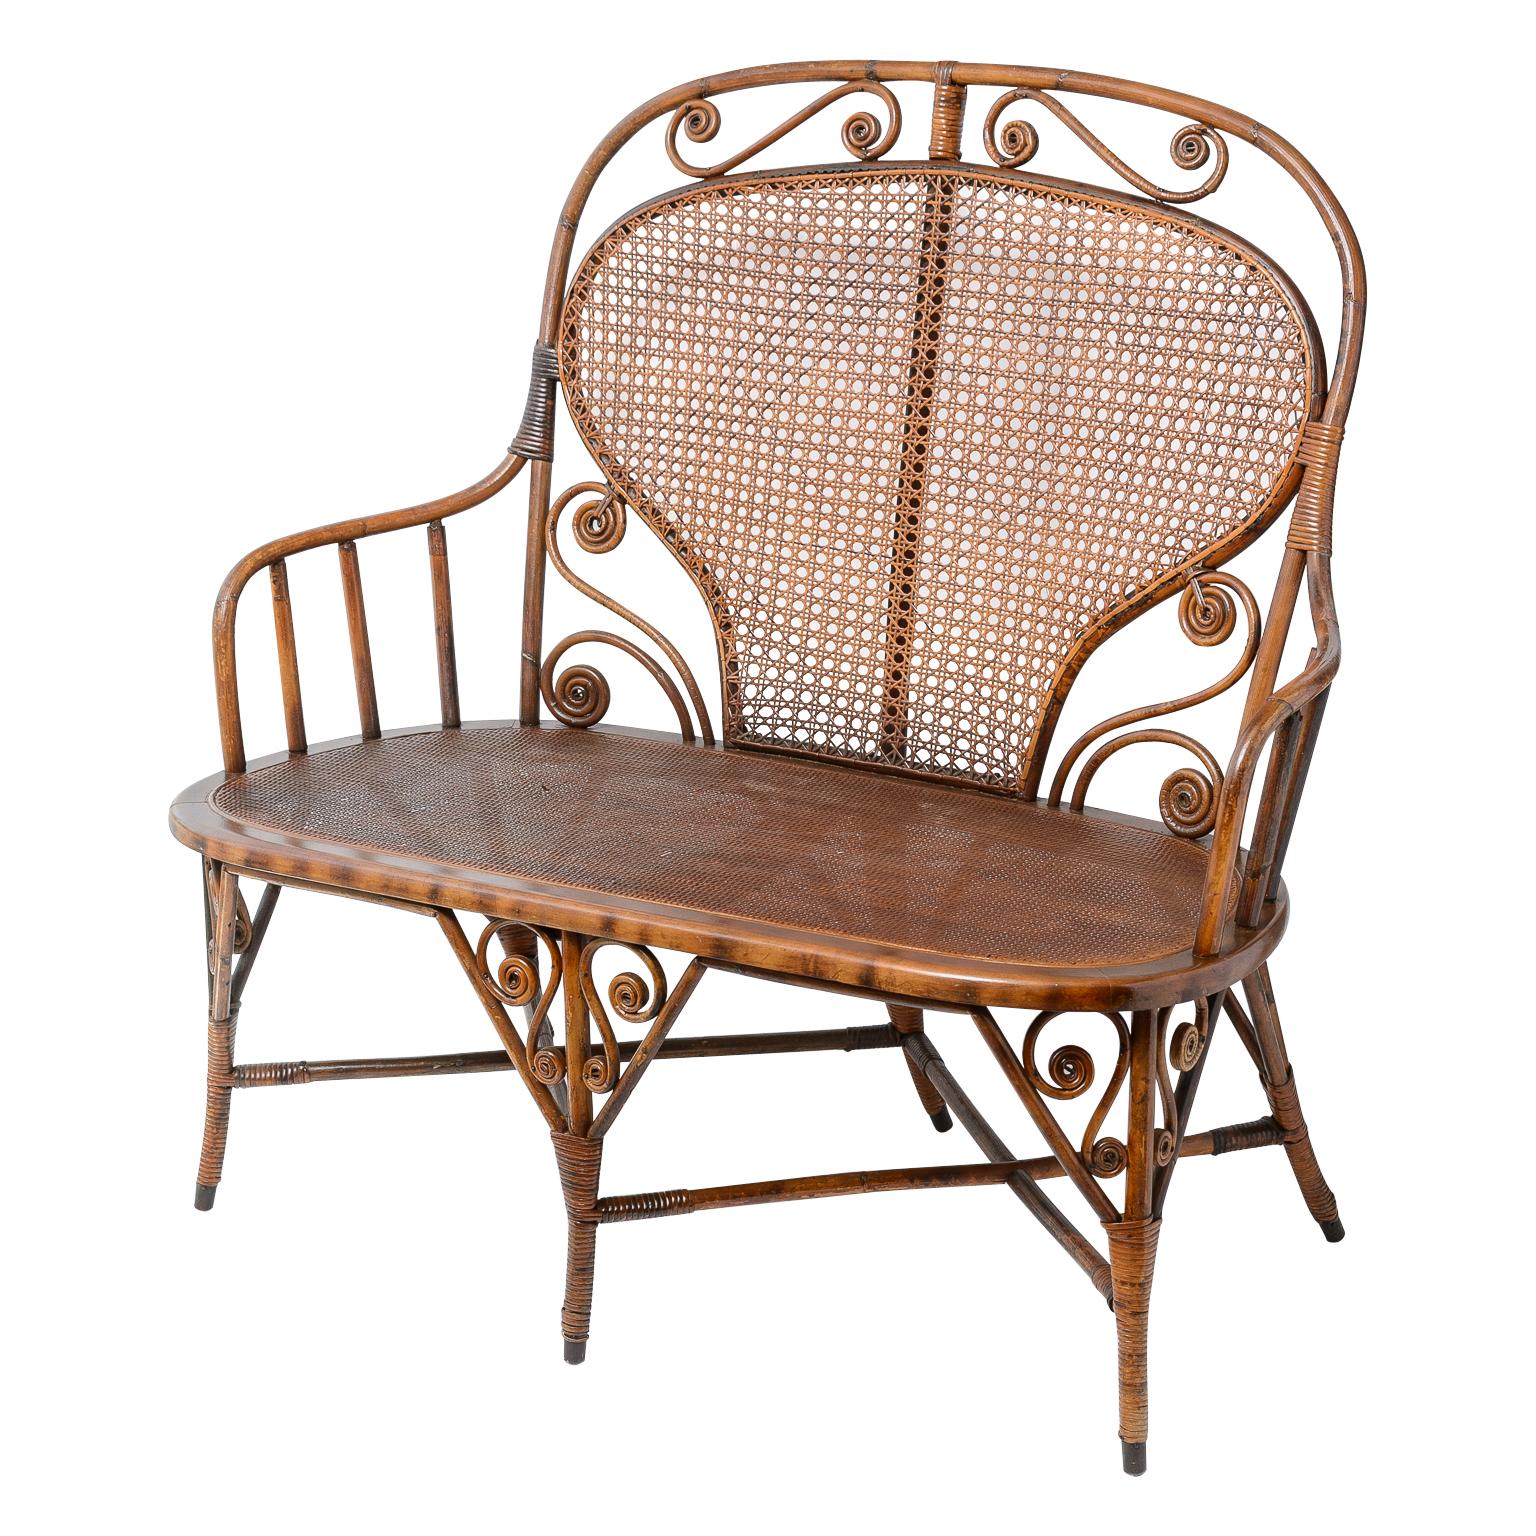 Austrian Antique Bentwood & Cane Settee, Attributed to Michael Thonet, C1900-1920s For Sale